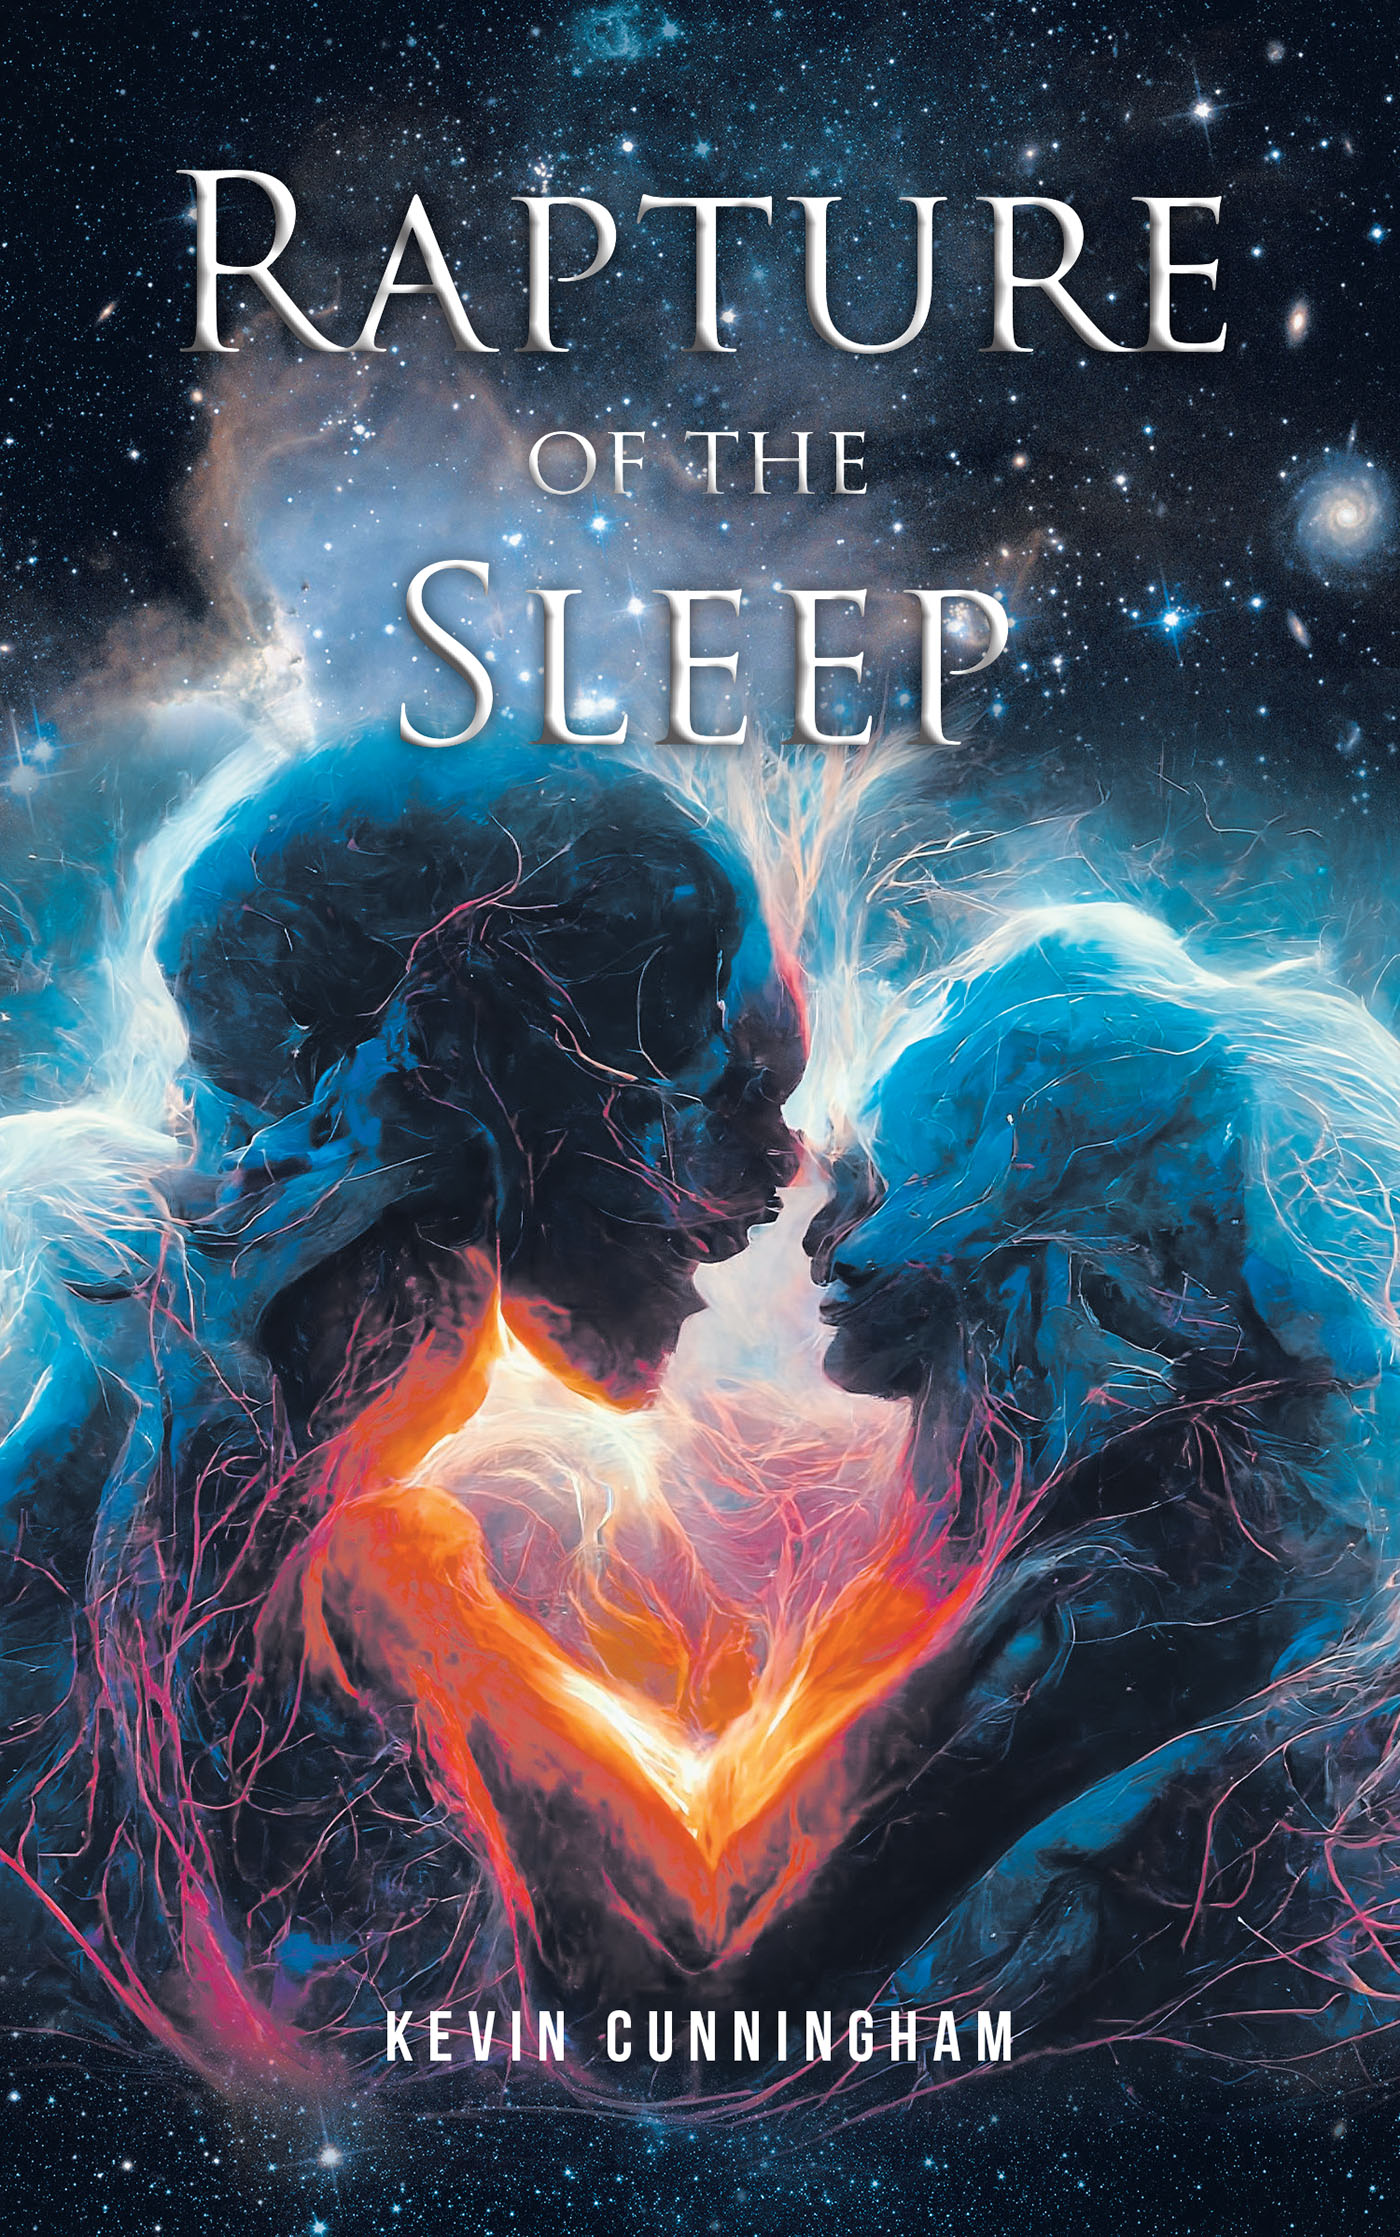 Kevin Cunningham’s New Book, "Rapture of the Sleep," Follows One Man’s Quest to Navigate Between His Multiple Lives That Straddle Both Reality and Subconscious Thoughts